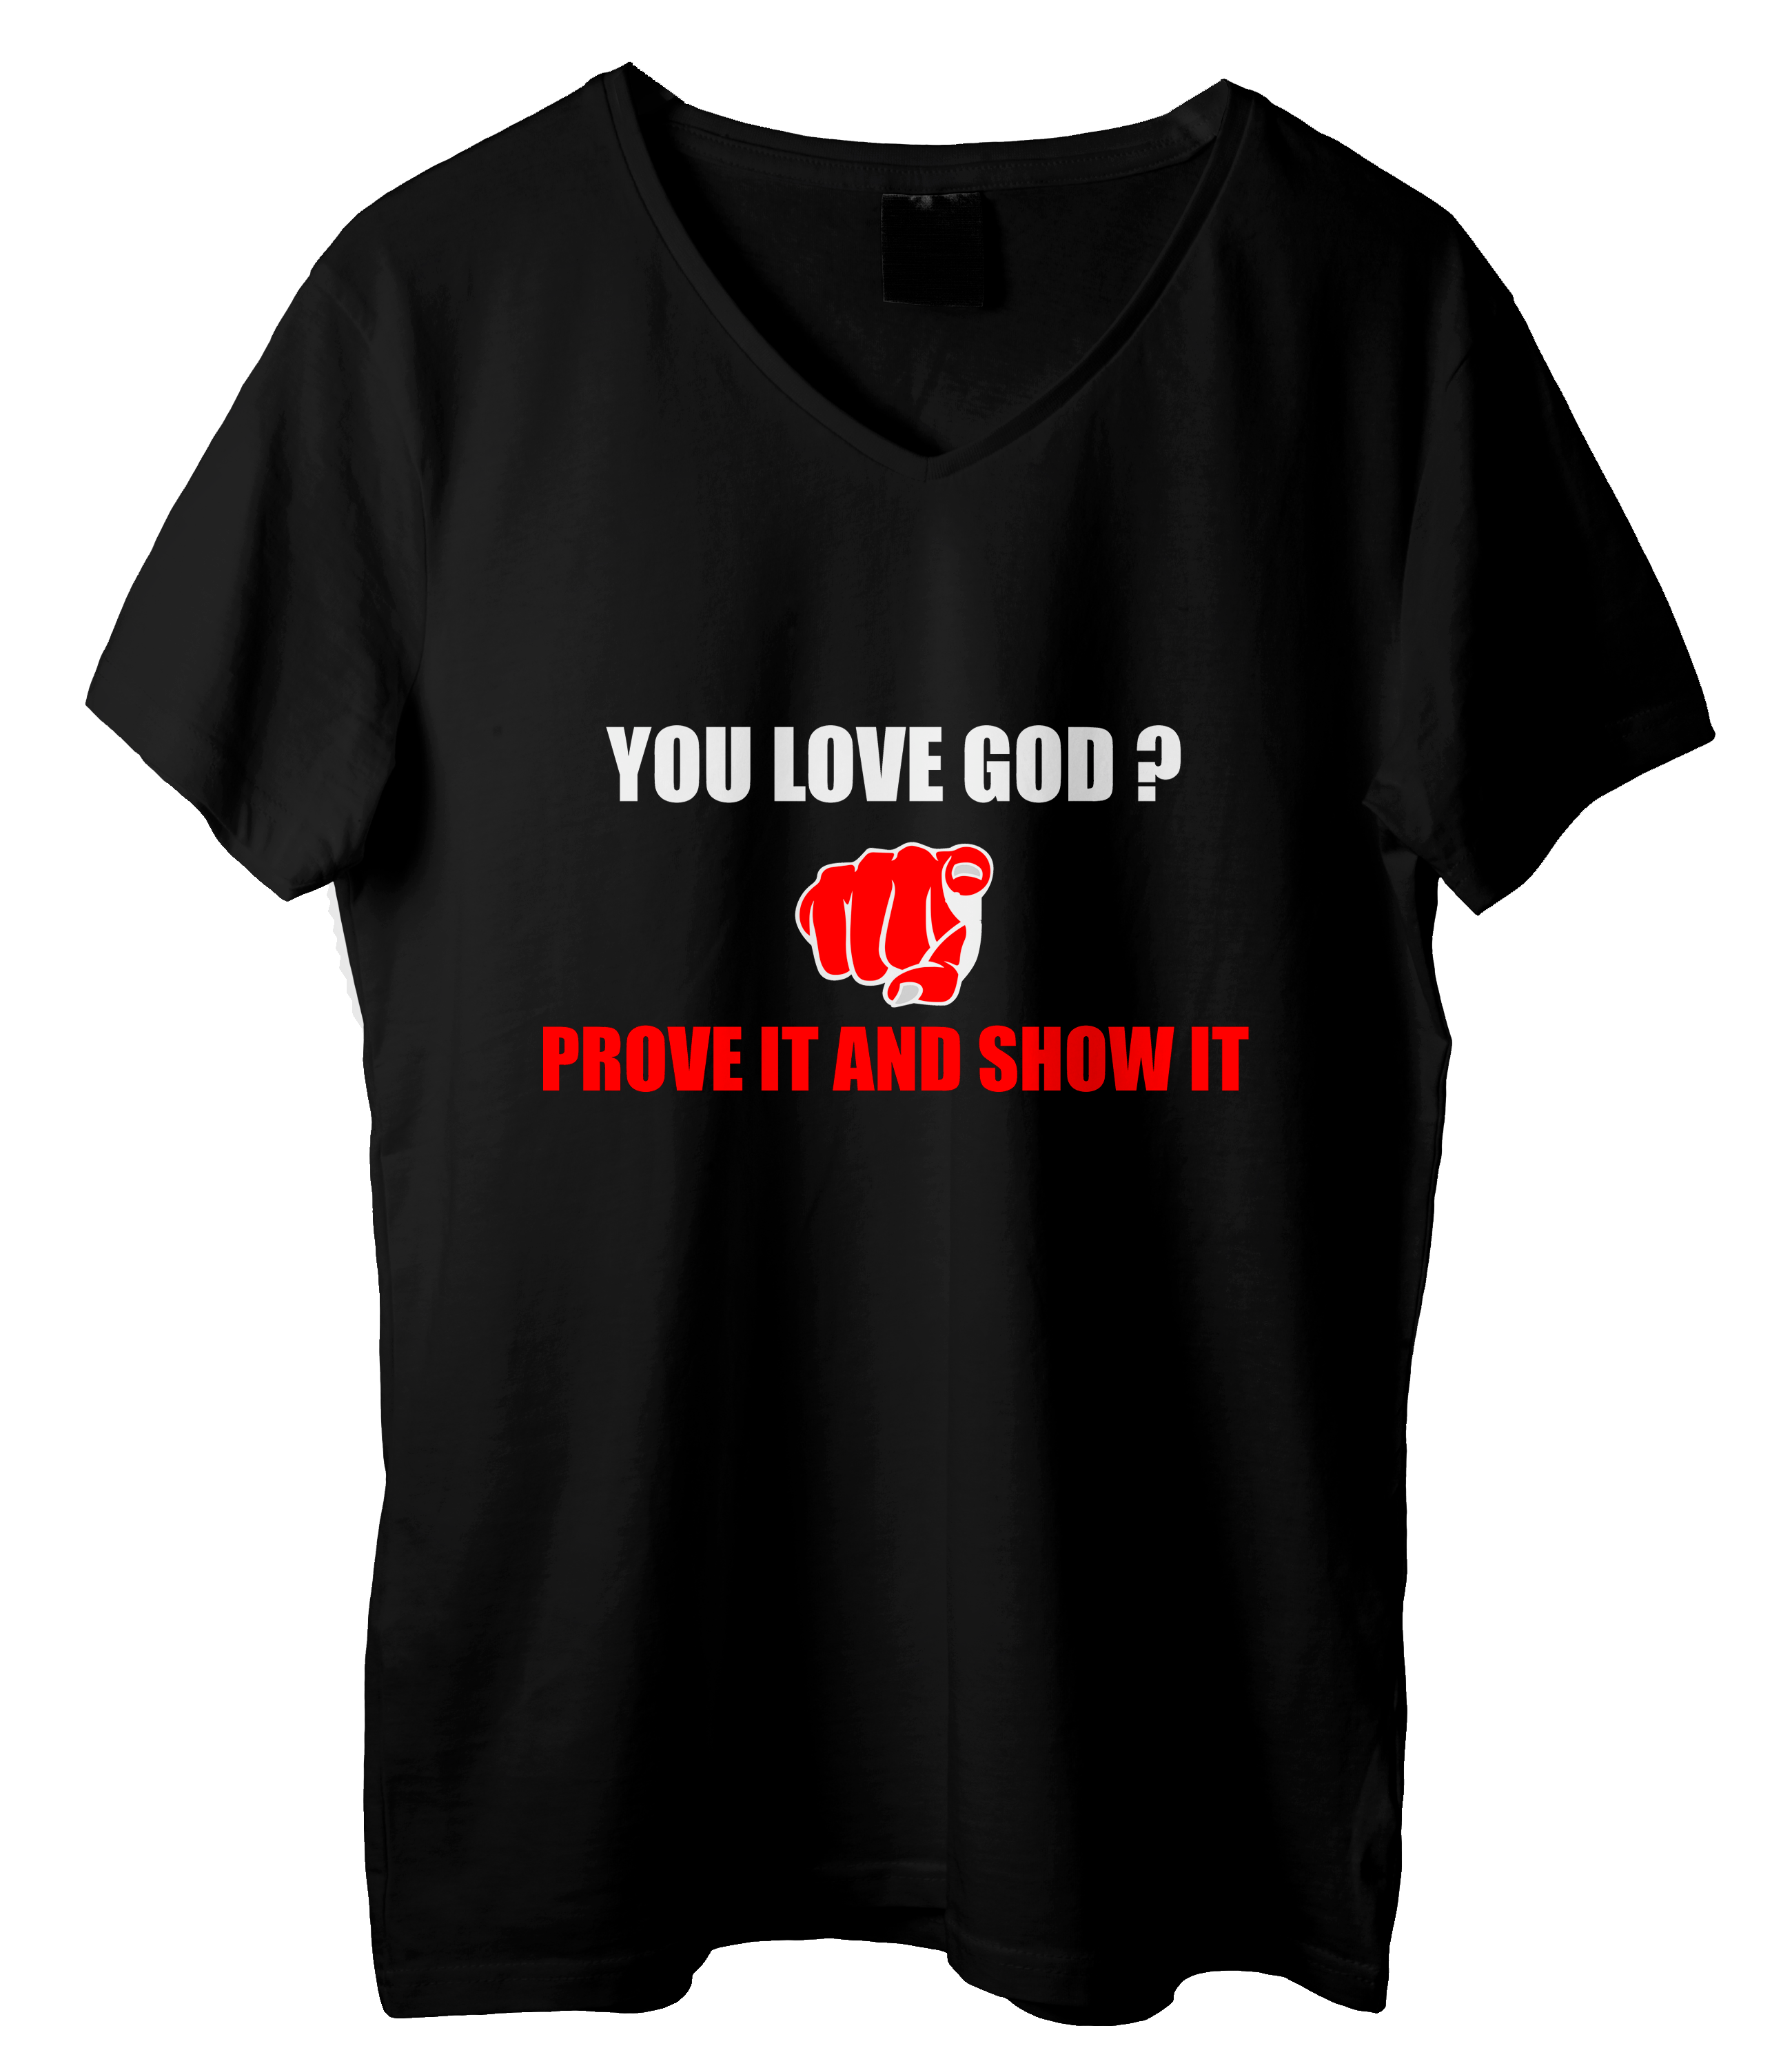 You Love God, Prove it and Show it Shirt